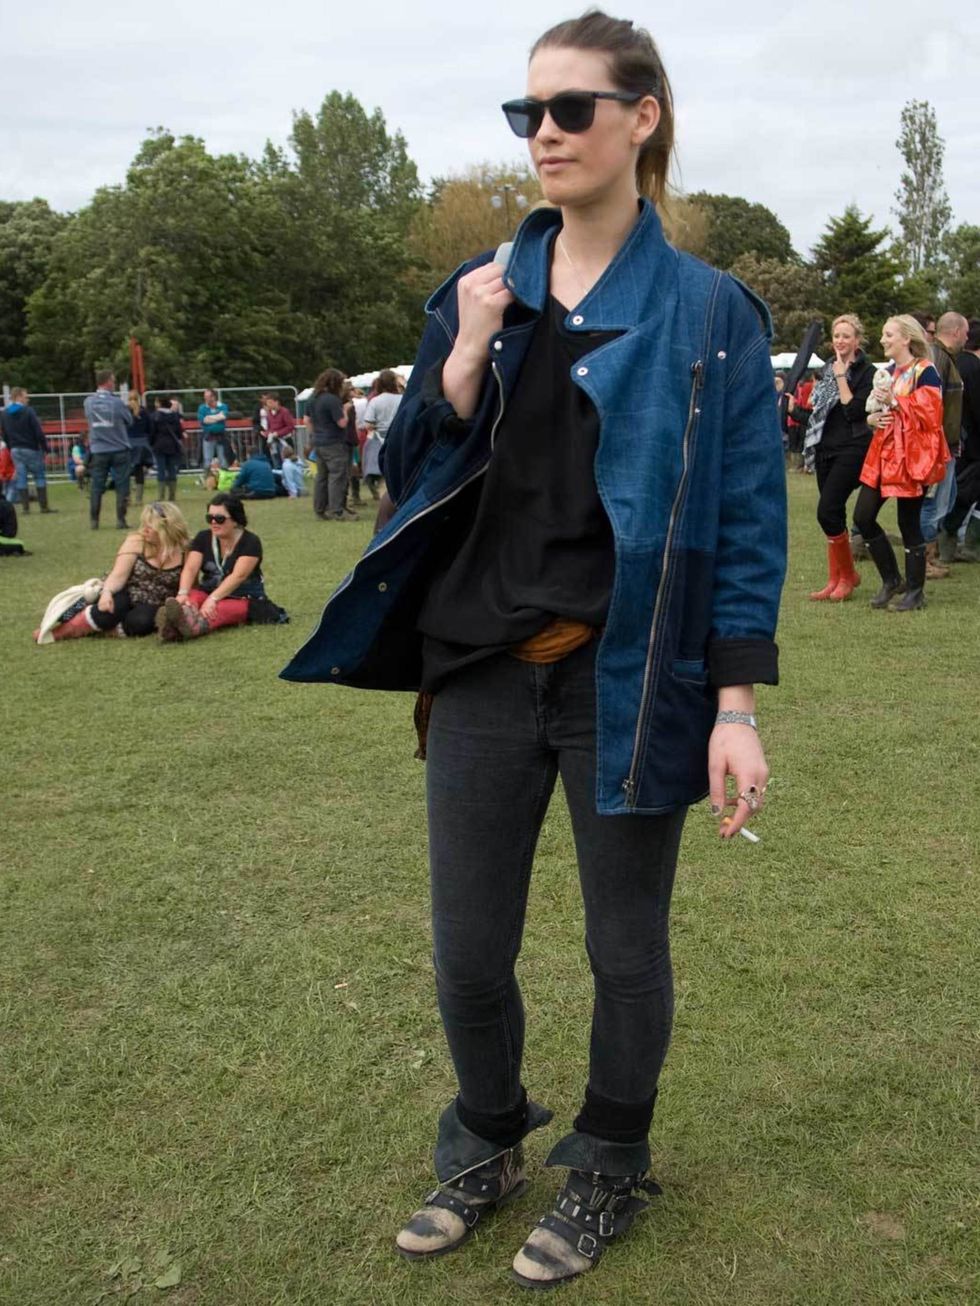 <p>Sophie, 26, Fashion Coordinator. Isabel Marant jacket, Topshop top and jeans, Kurt Geiger boots, American Apparel bag, Oakley sunglasses.</p><p>Photo by Tim Knowles</p>